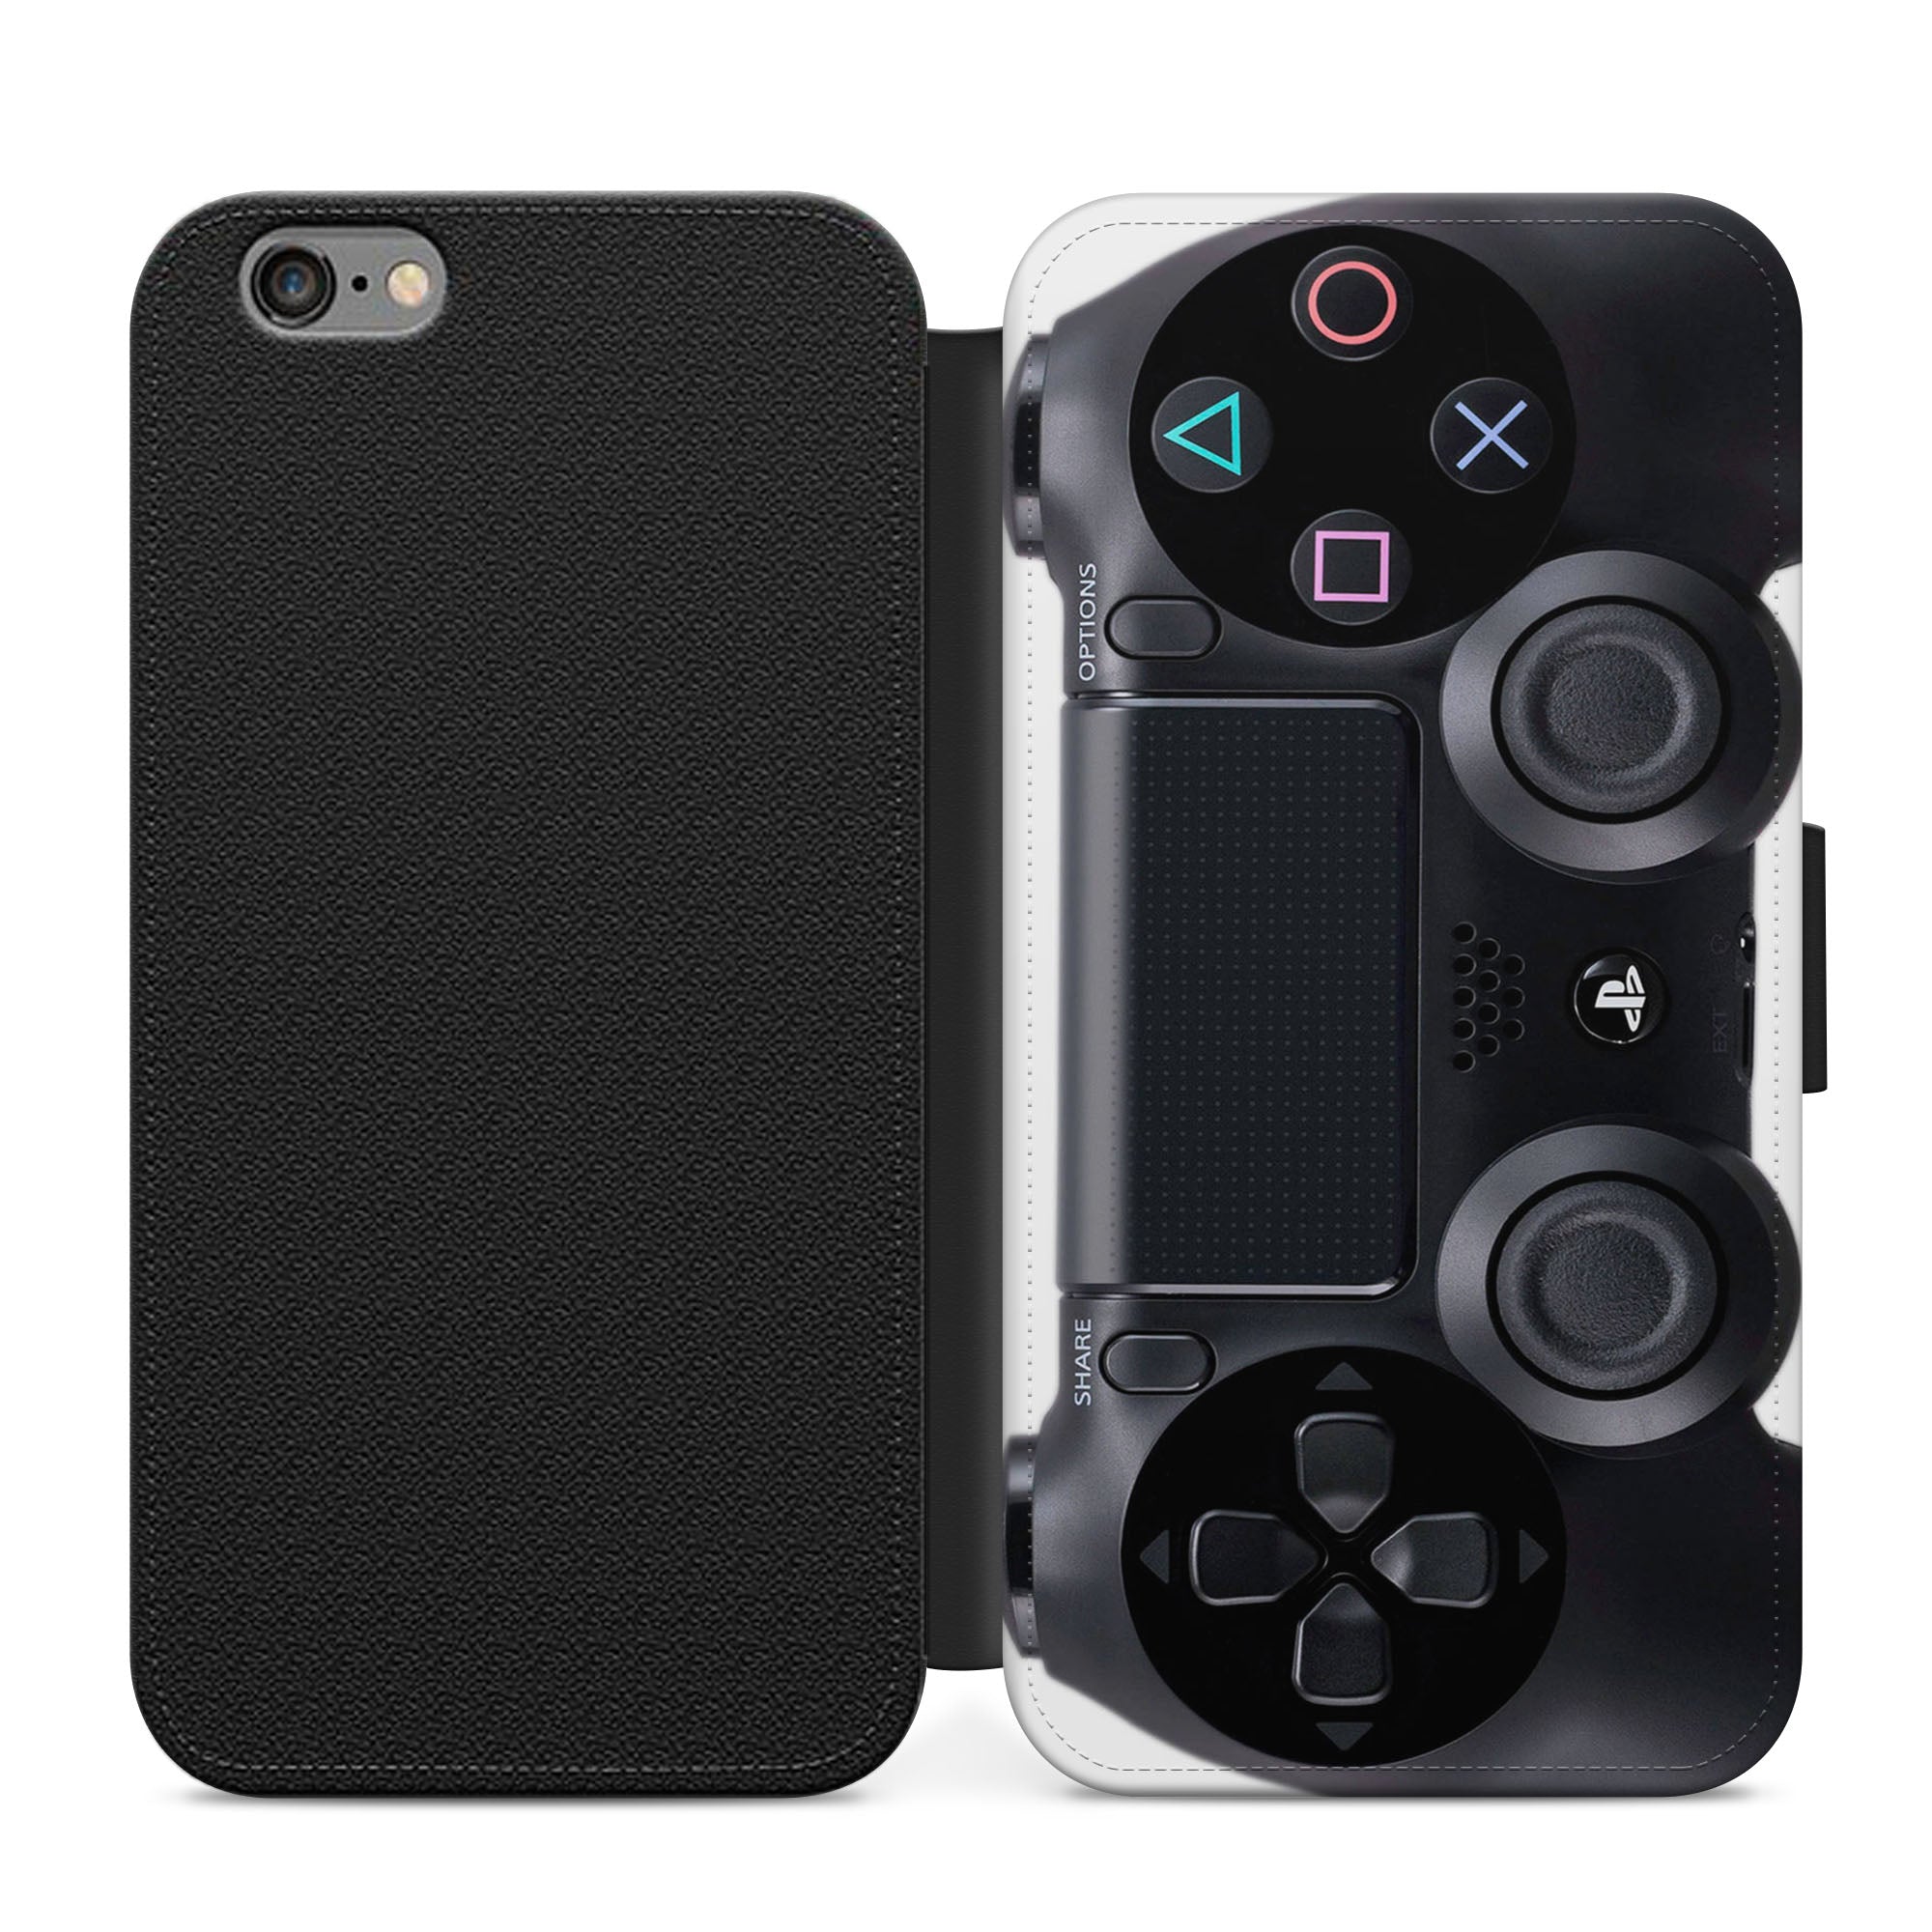 PS Controller Icons Faux Leather Flip Case Wallet for iPhone / Samsung